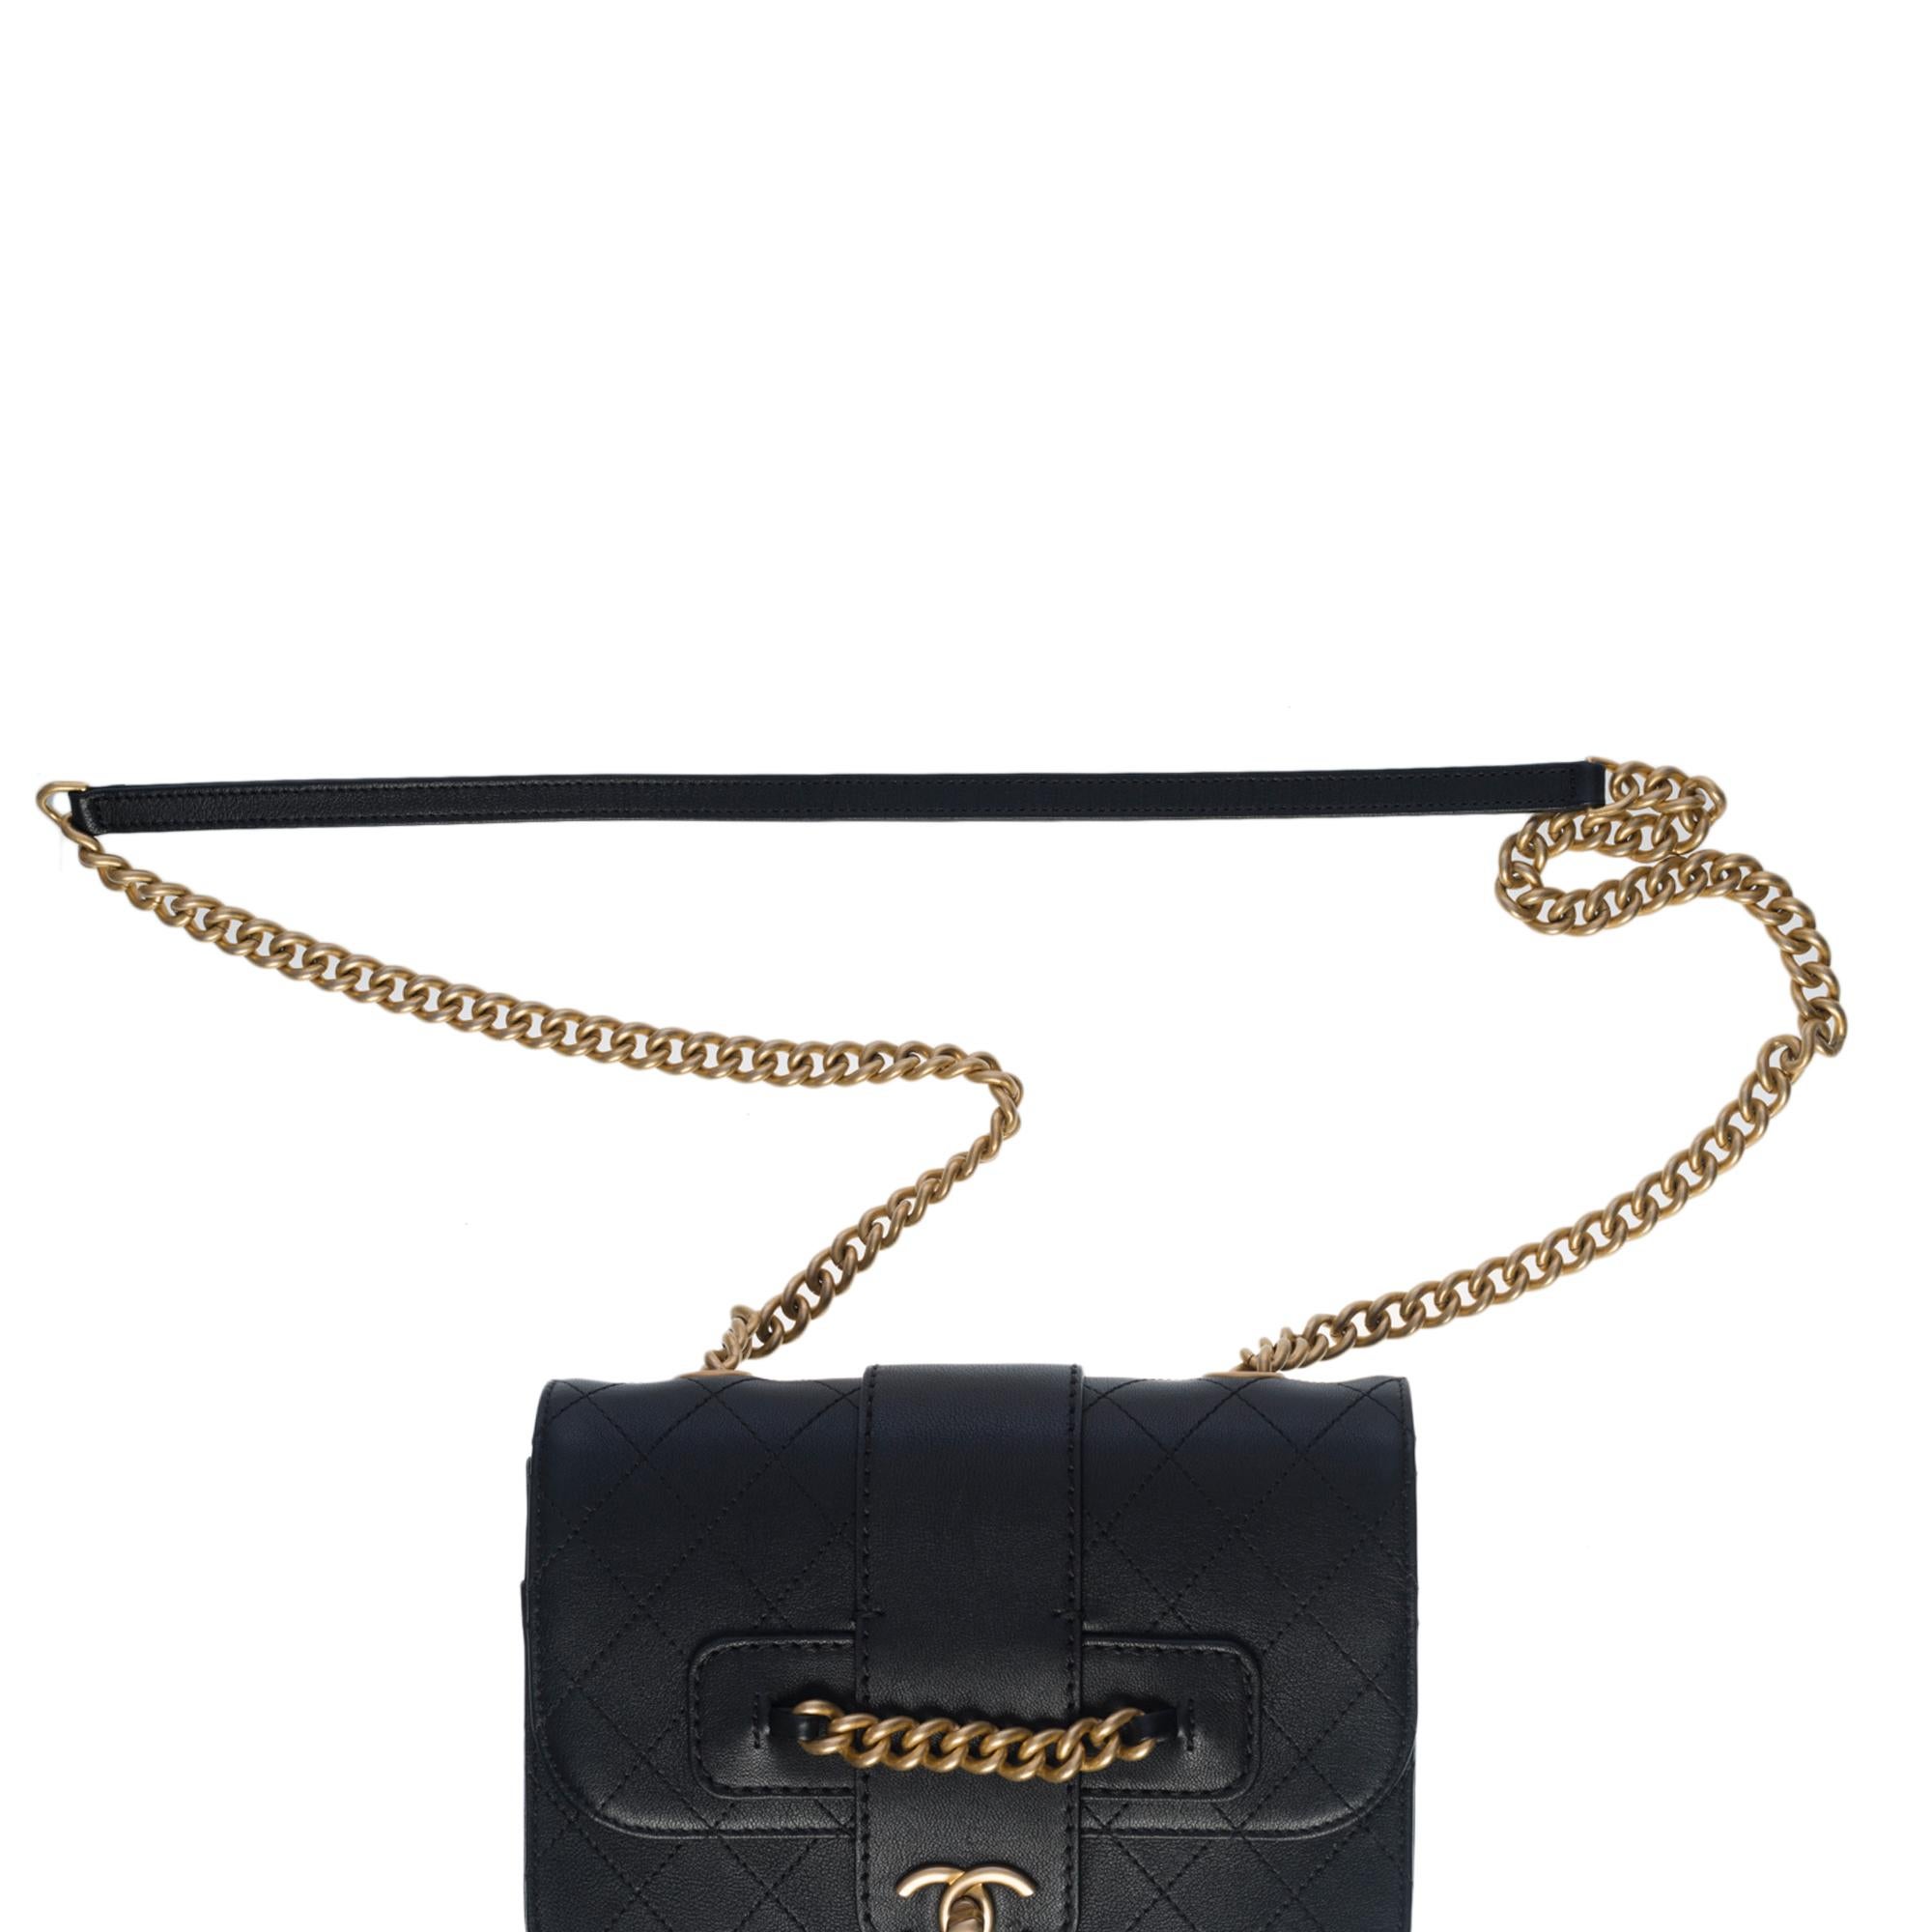 Limited Edition Chanel Classic shoulder flap bag in black calf leather, GHW 3